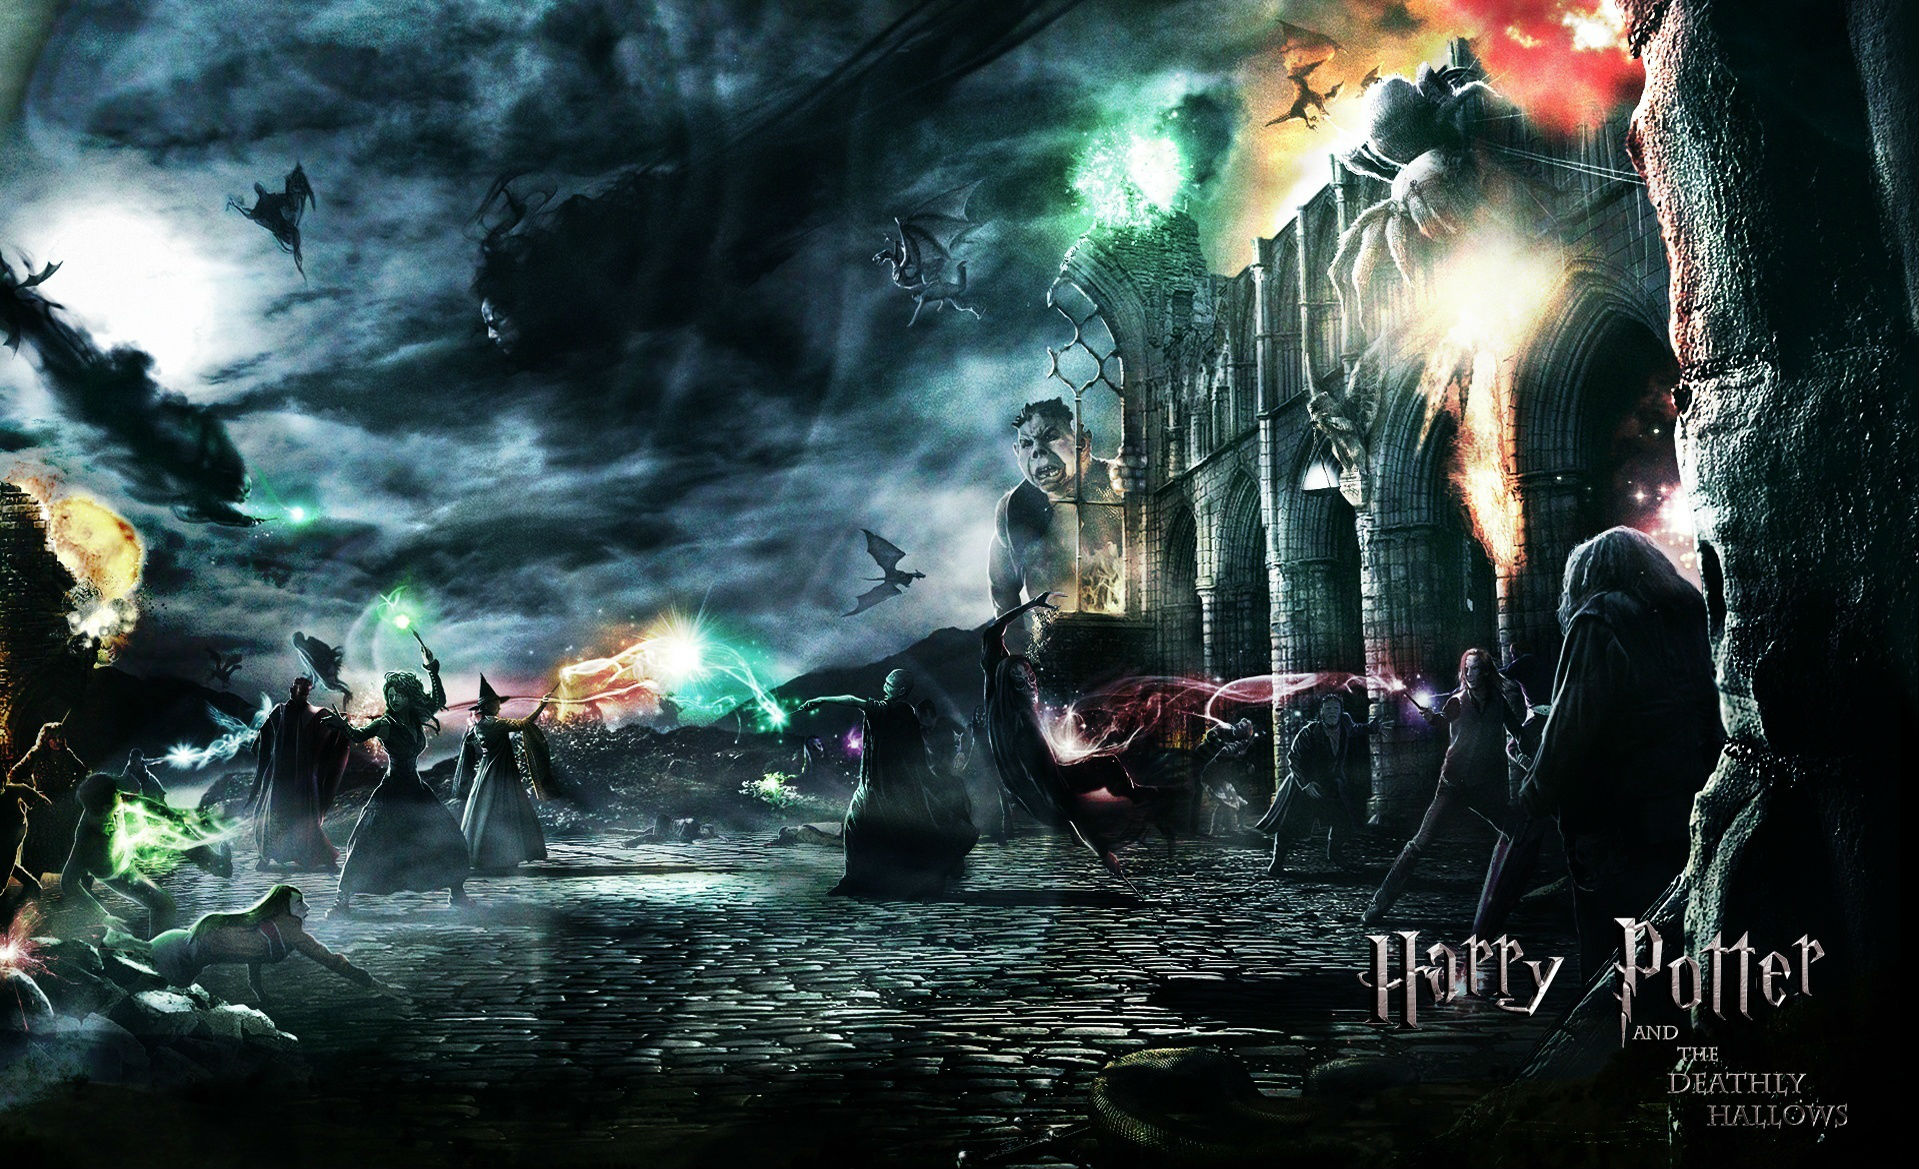 harry potter, harry potter and the deathly hallows: part 2, movie